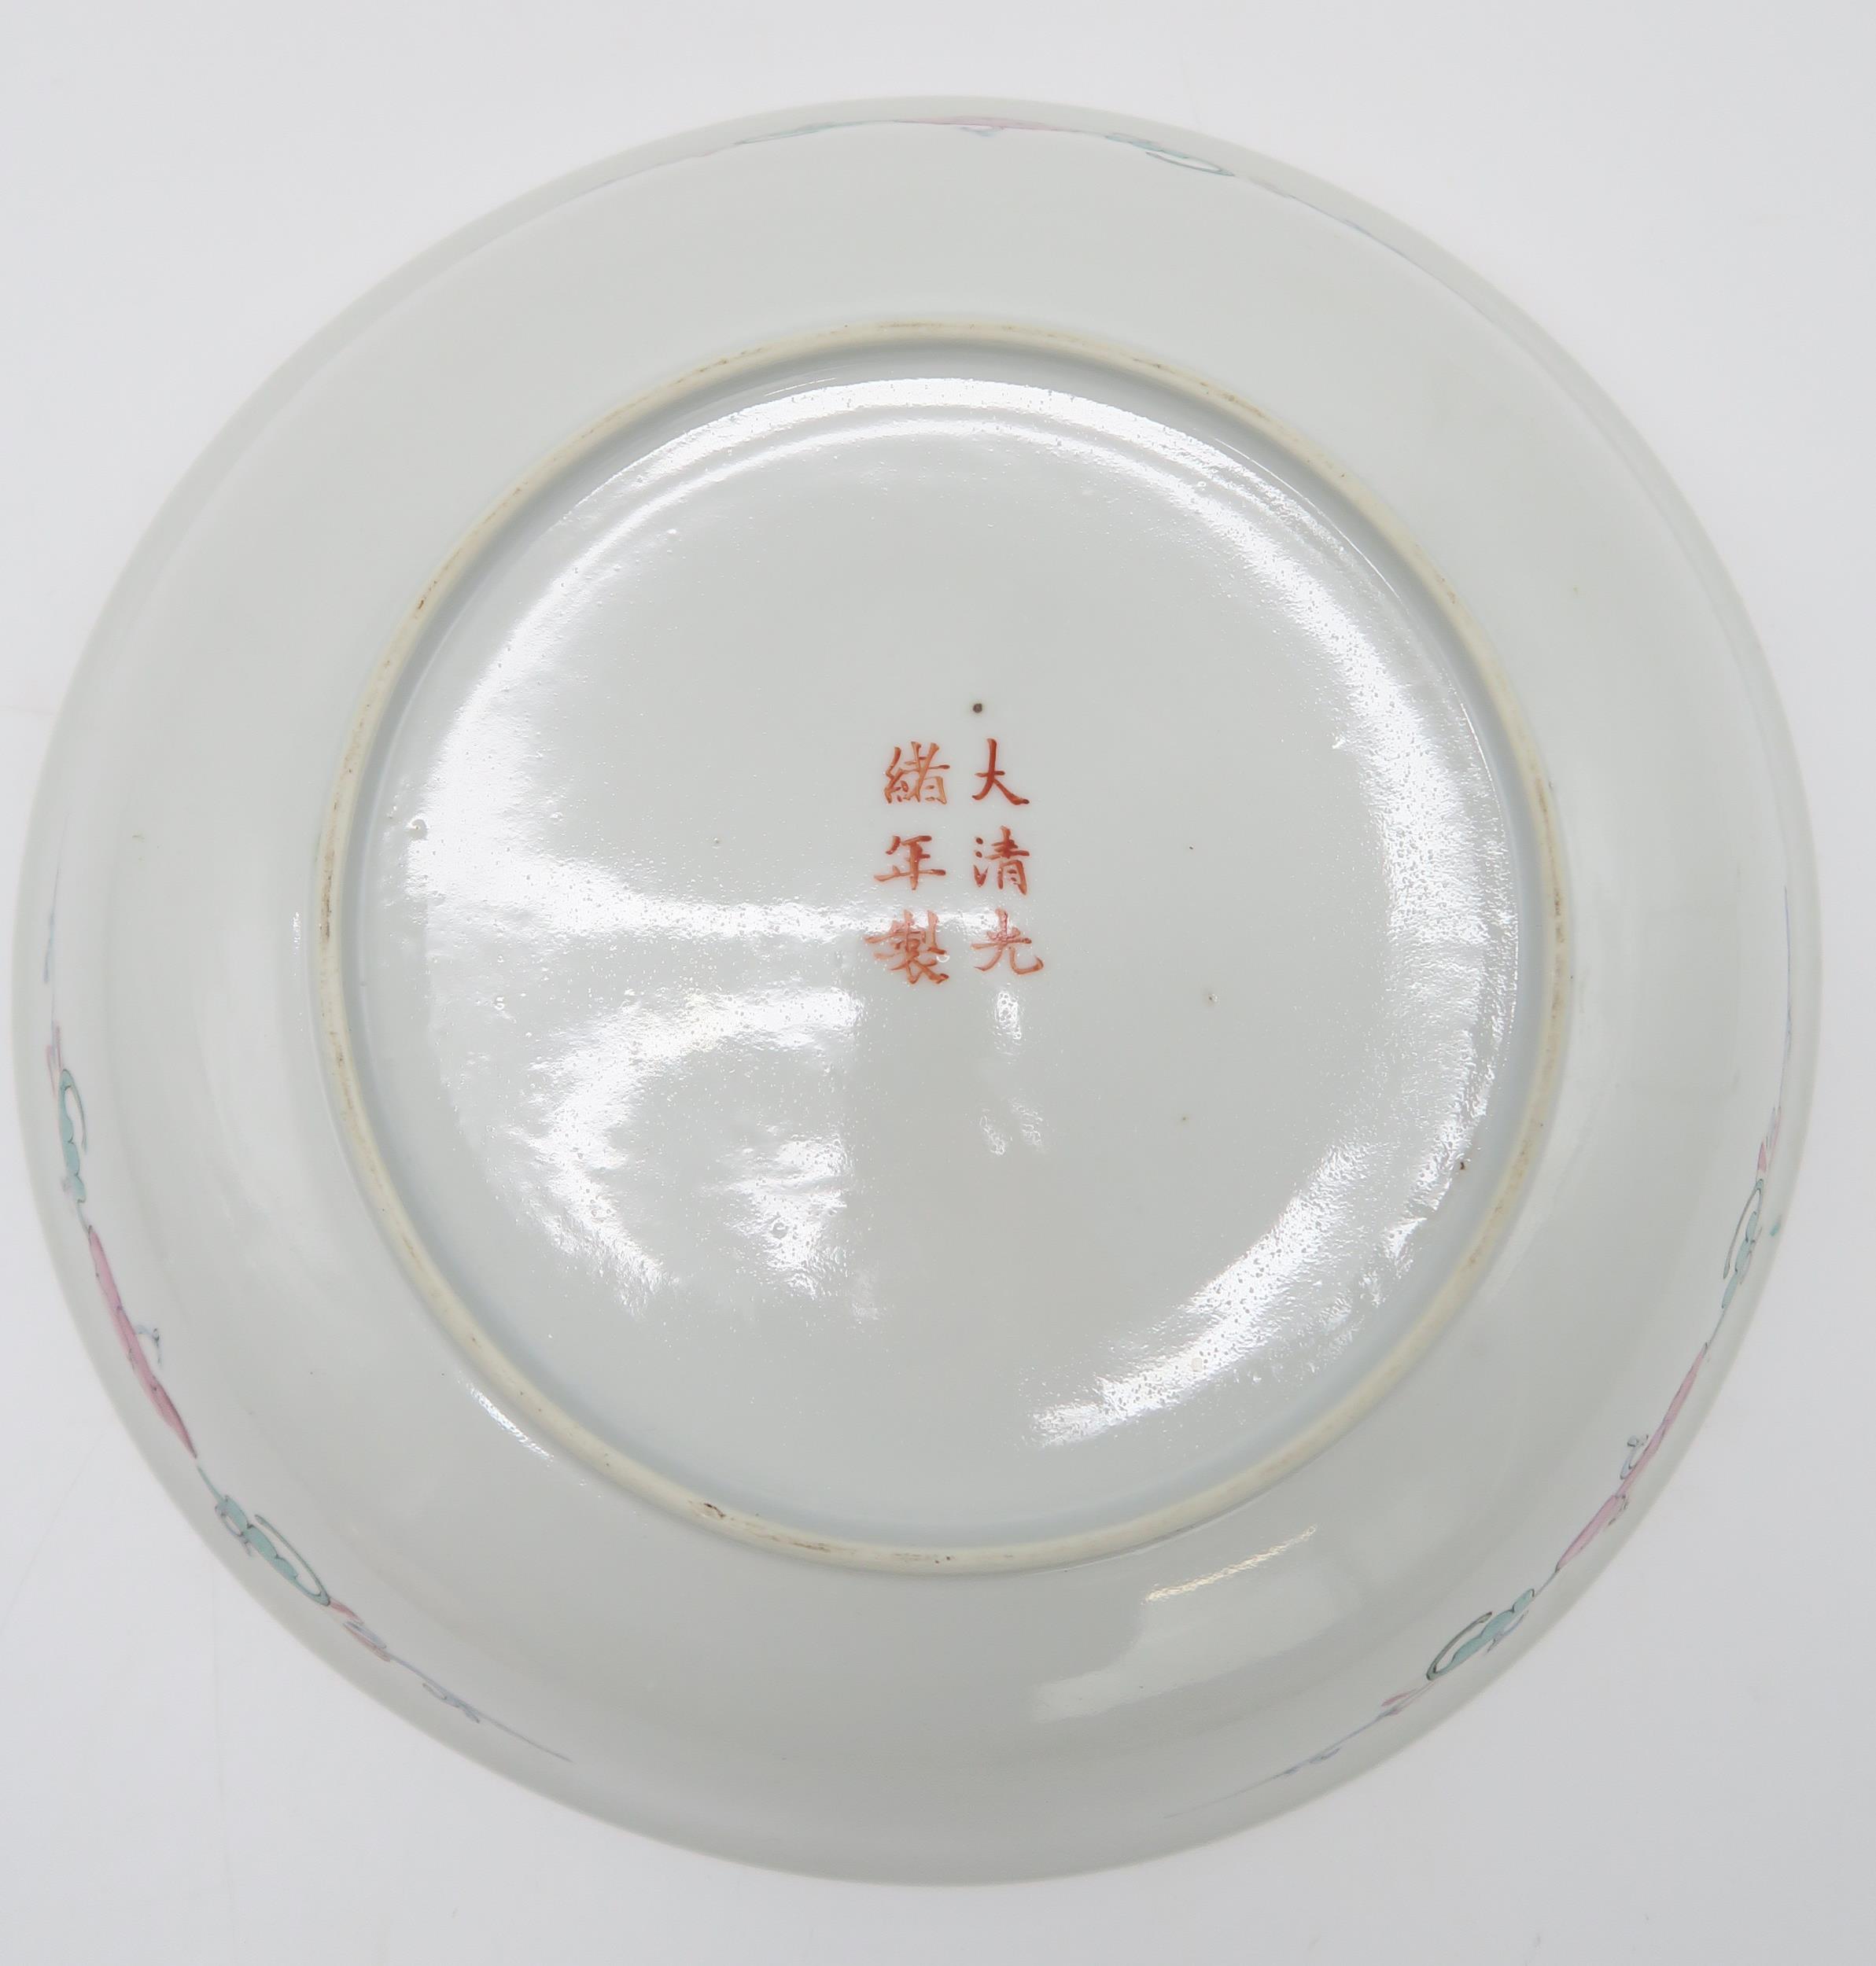 TWO SIMILAR CHINESE DISHES Painted with red dragons and phoenix birds,within key pattern borders, - Image 5 of 9